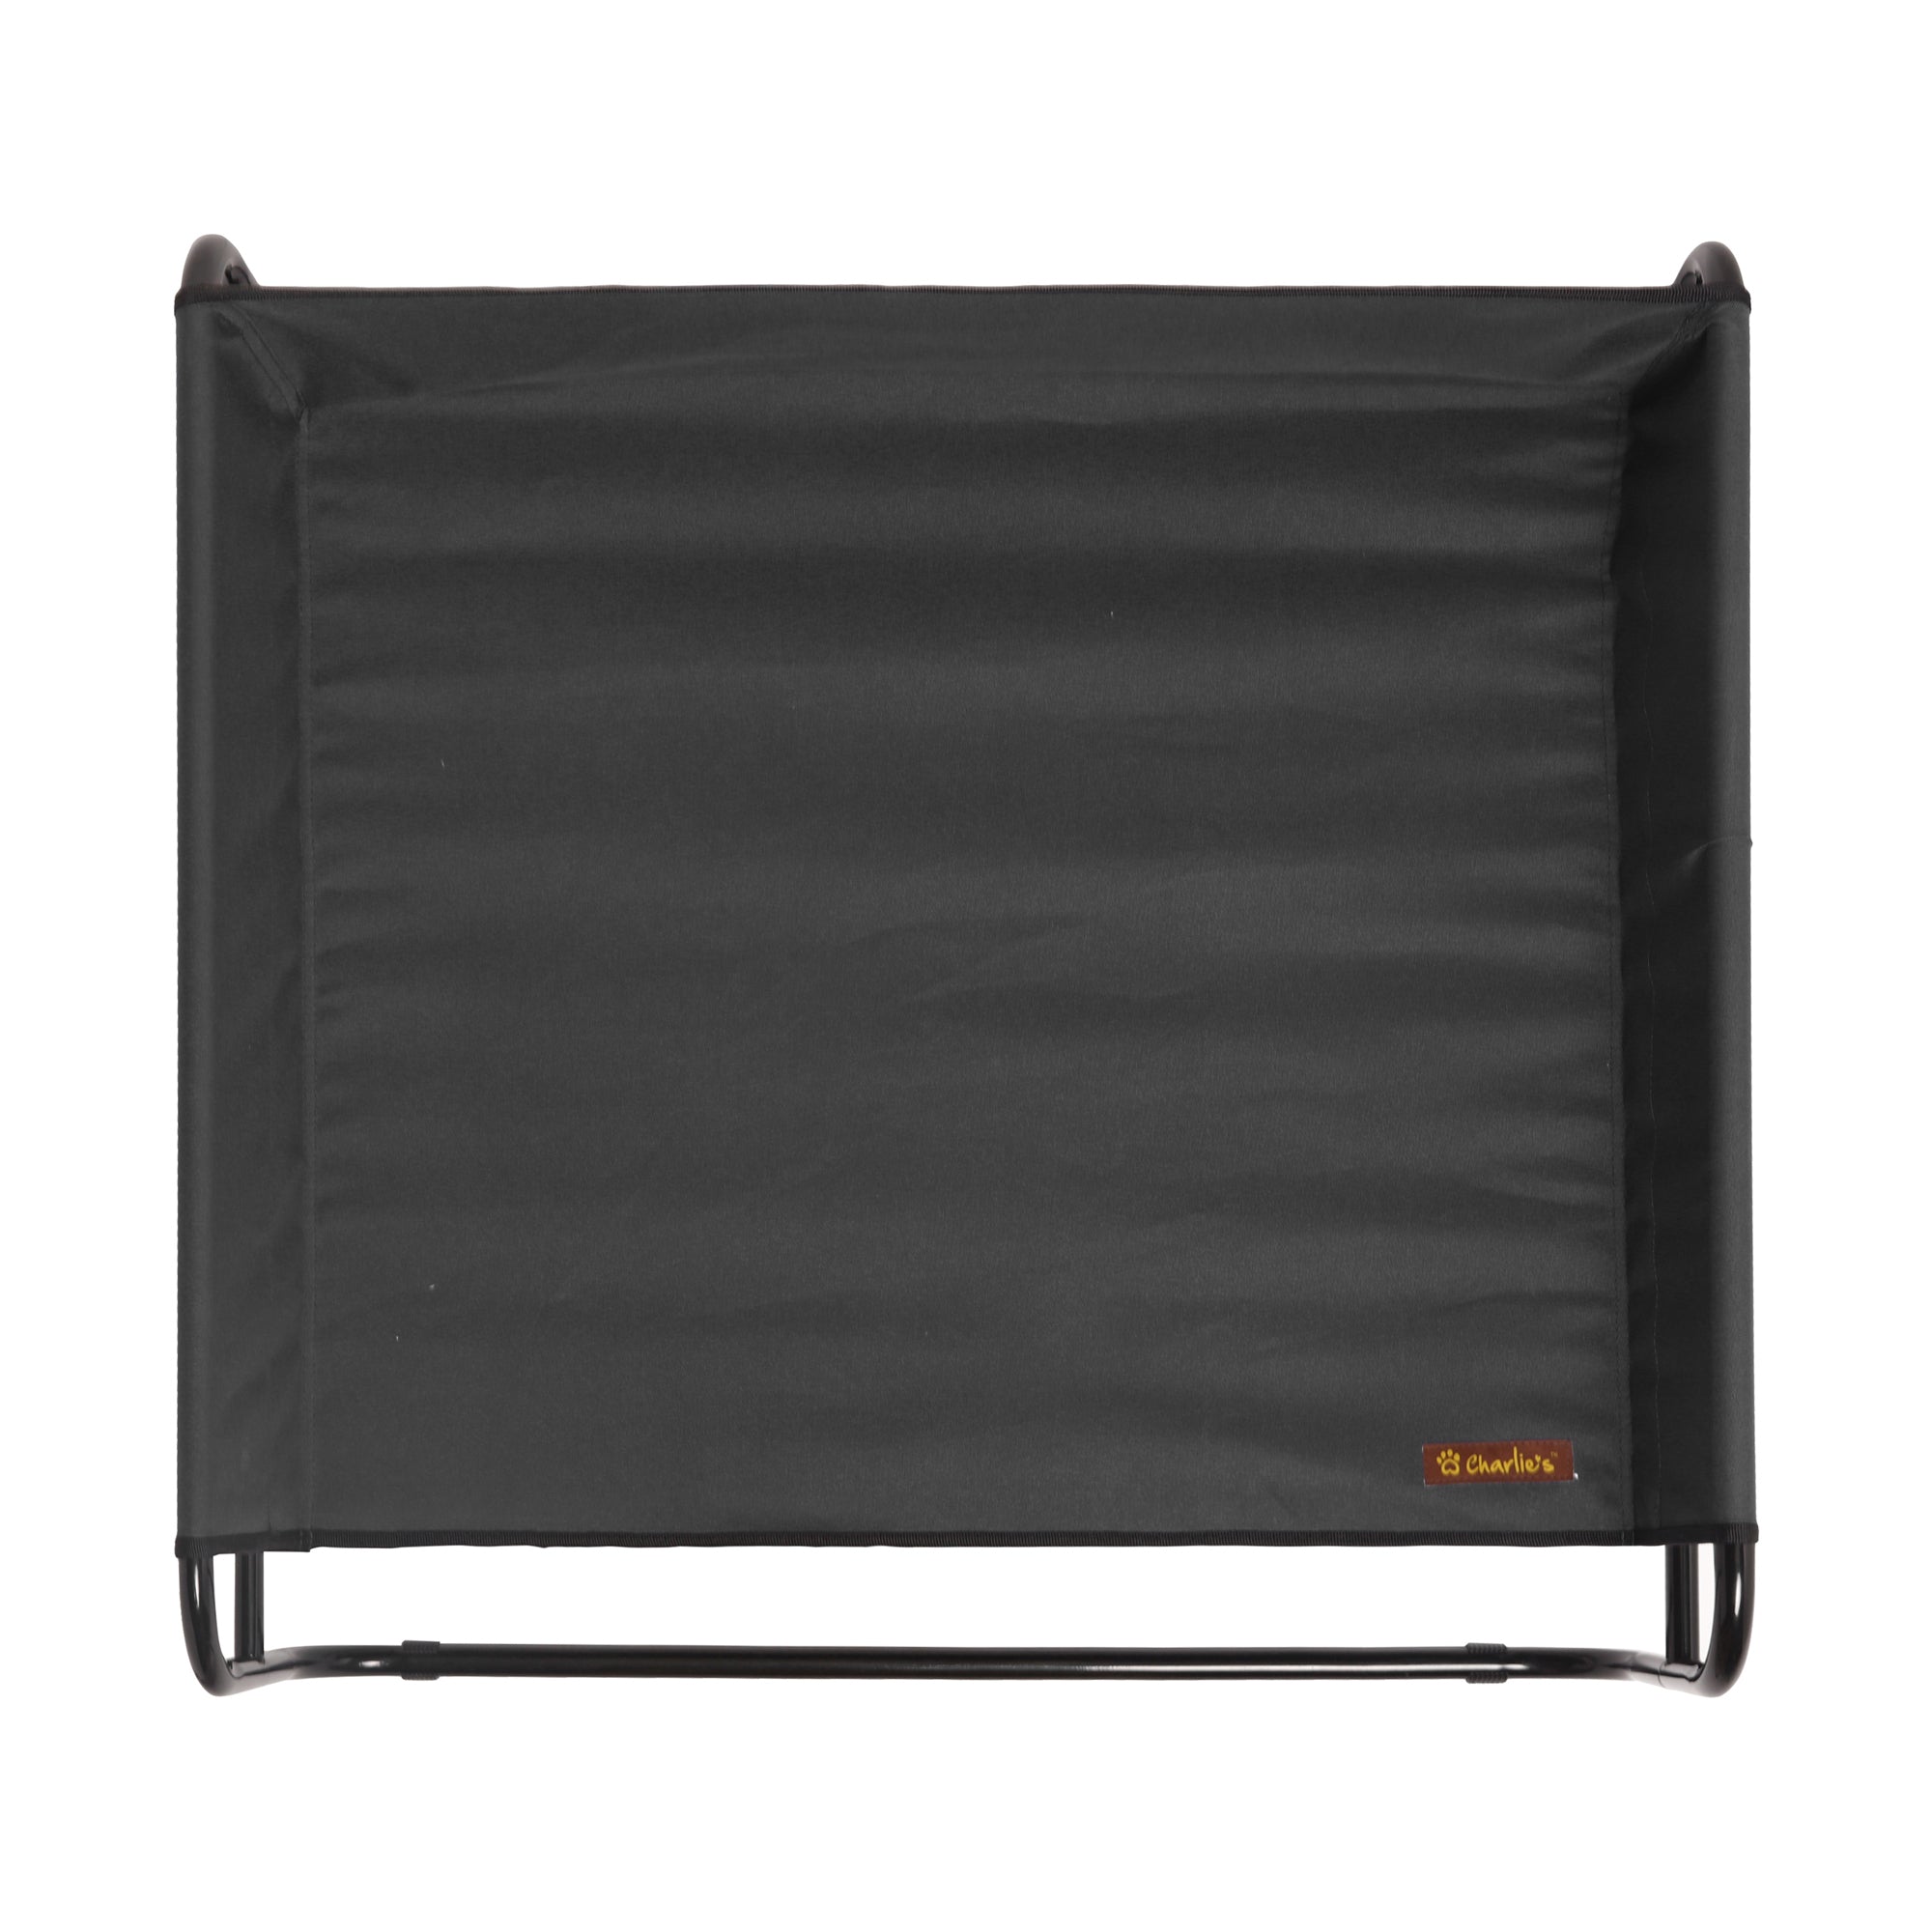 Charlie's High Walled Outdoor Trampoline Pet Bed Cot - Black